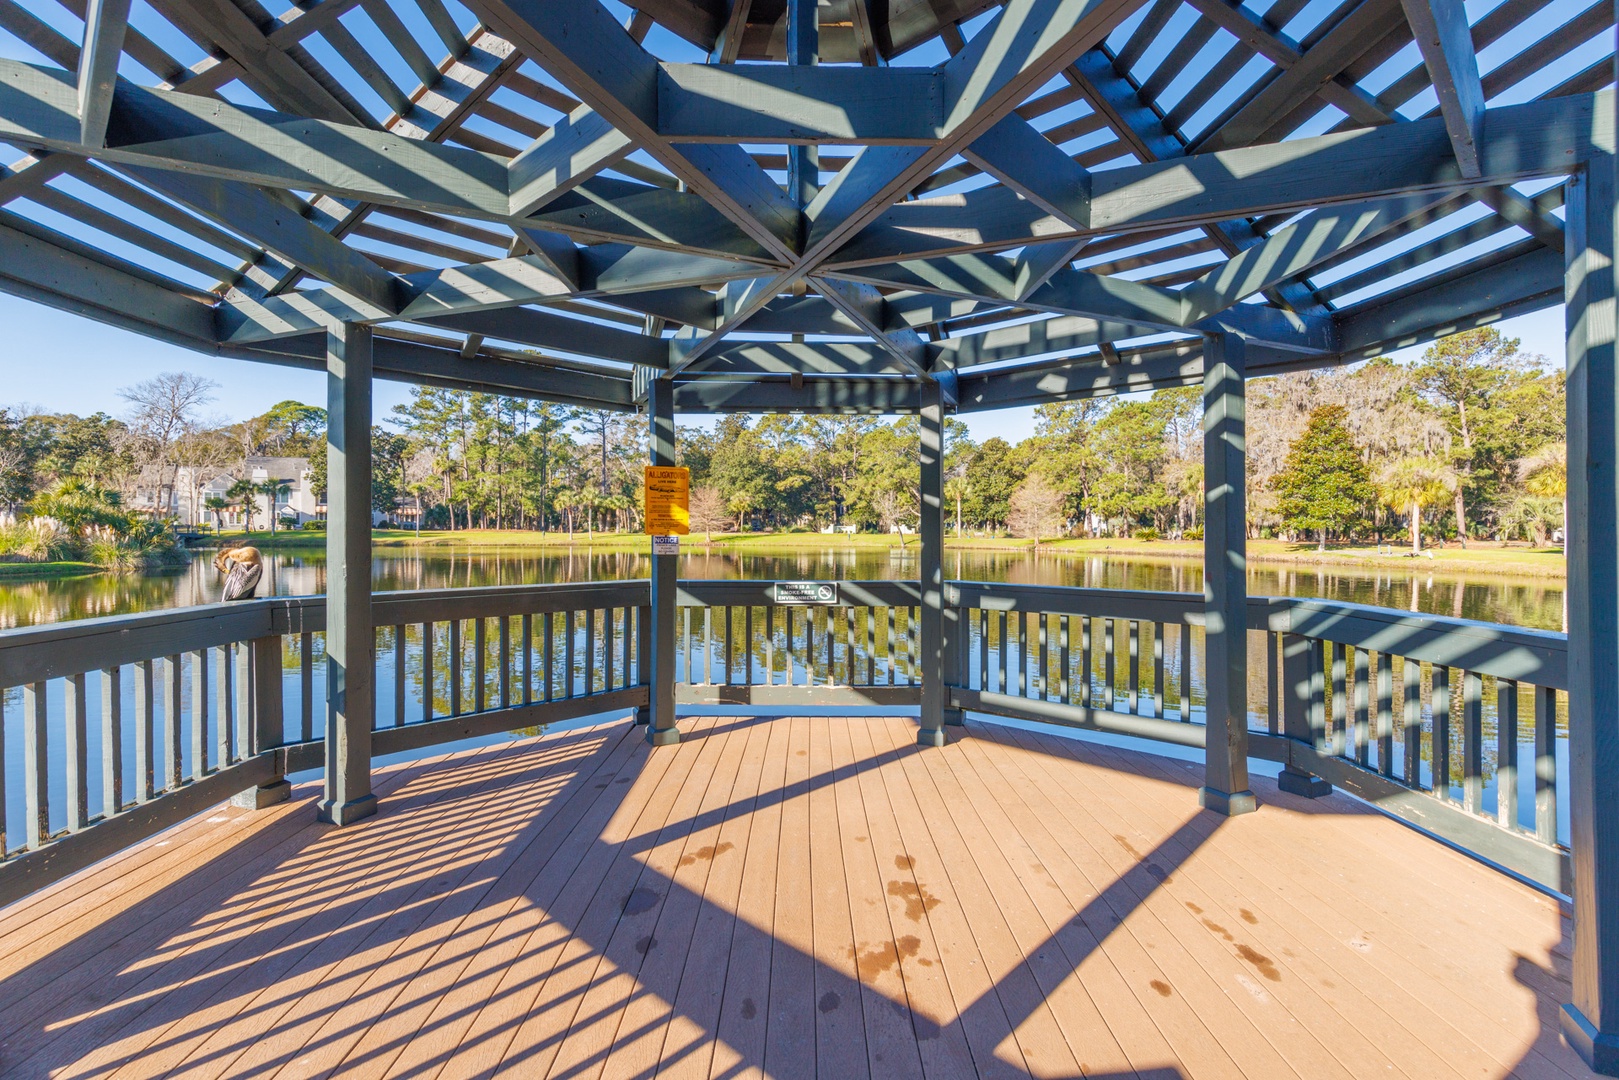 Tranquility found: A peaceful retreat by the lakeside gazebo